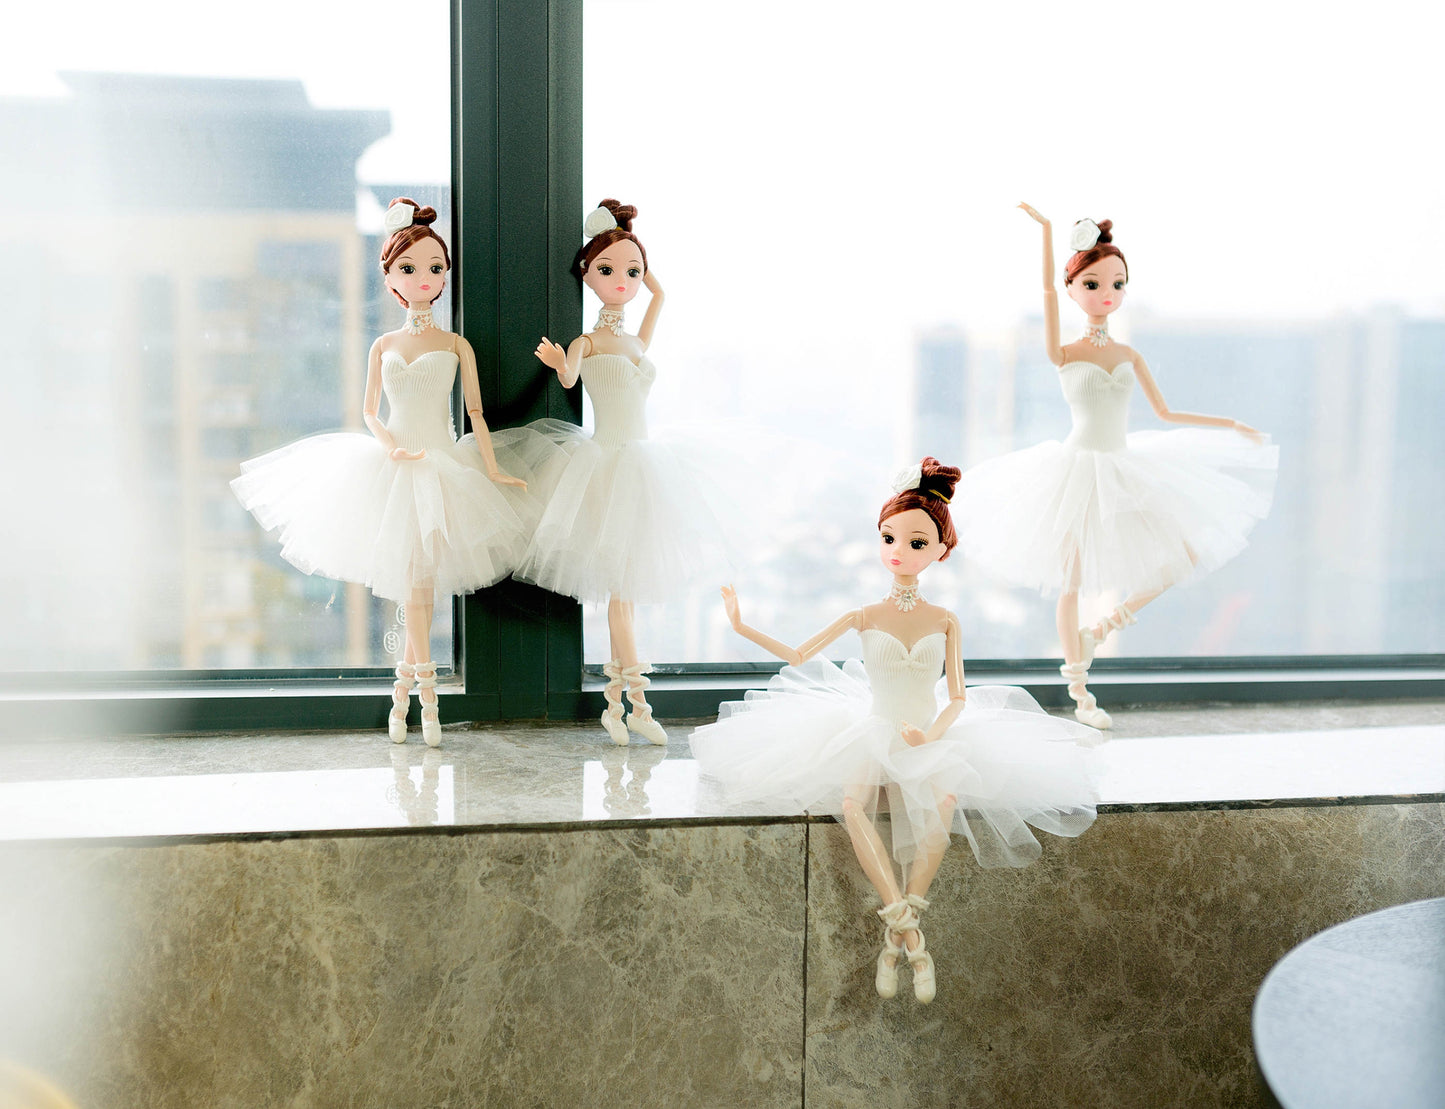 DOLLY® BALLERINA DOLL WITH WHITE TUTU DRESS - Bjd 12 joints 12 inch 30 cm 1/6 scale fashion doll